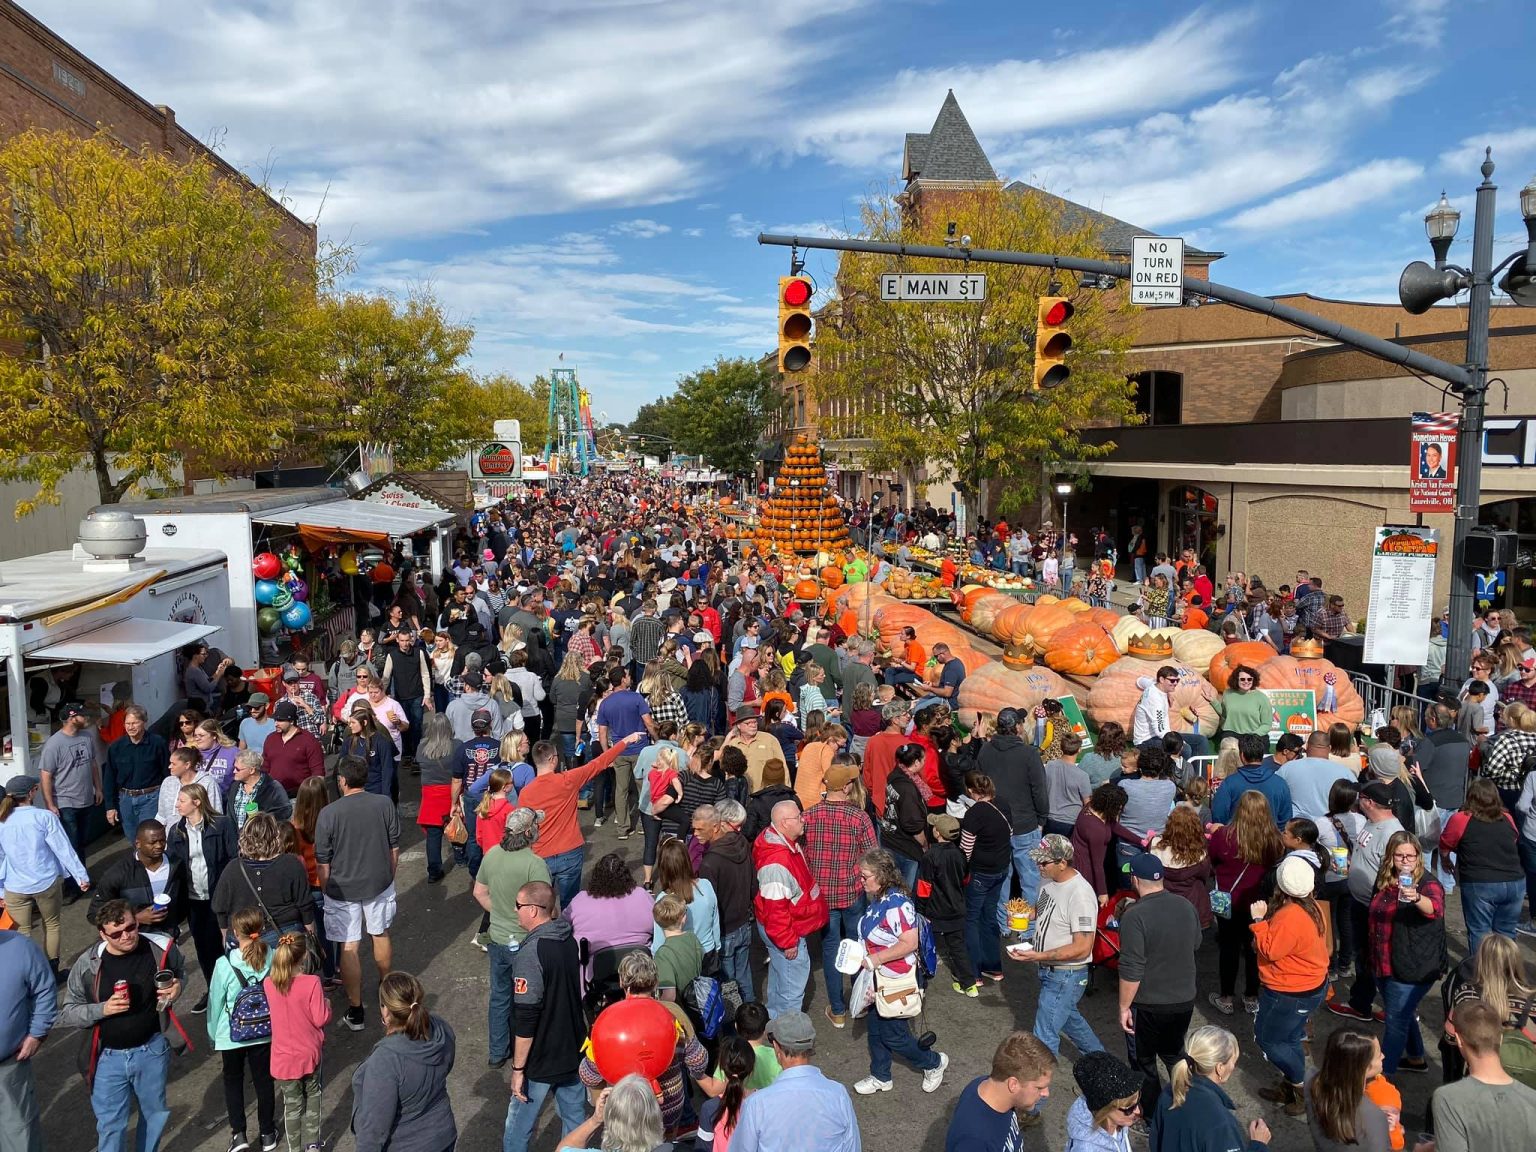 Circleville Passes Ordinance for Pumpkin Show, but Dewine Yet to